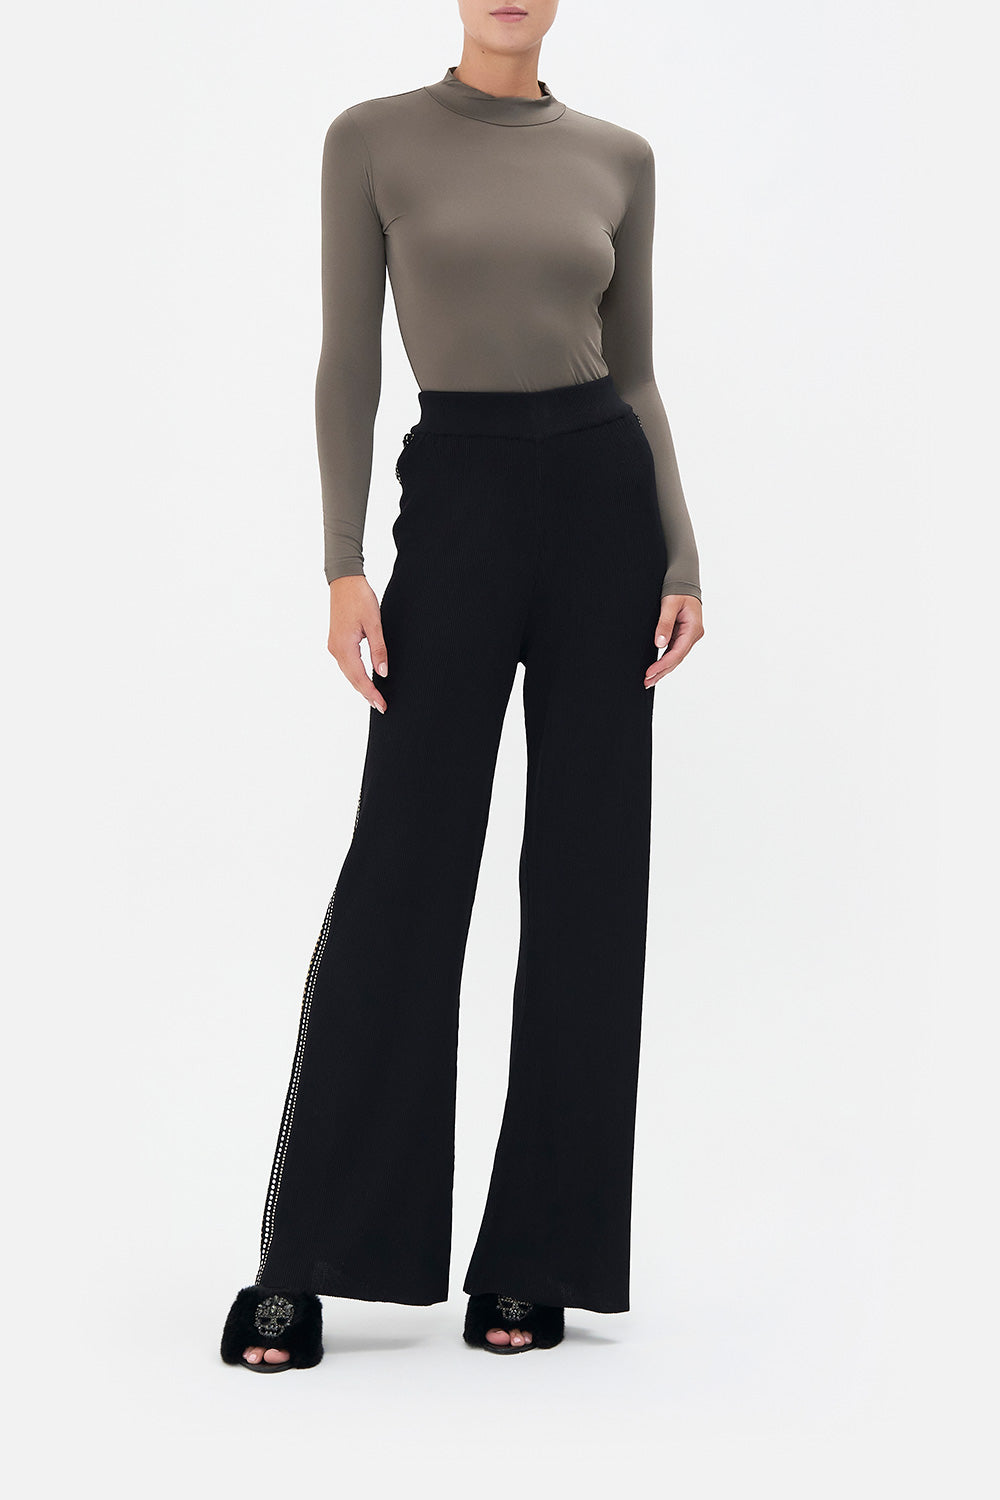 FLARED JACQUARD KNIT PANT DANCE WITH DUENDE